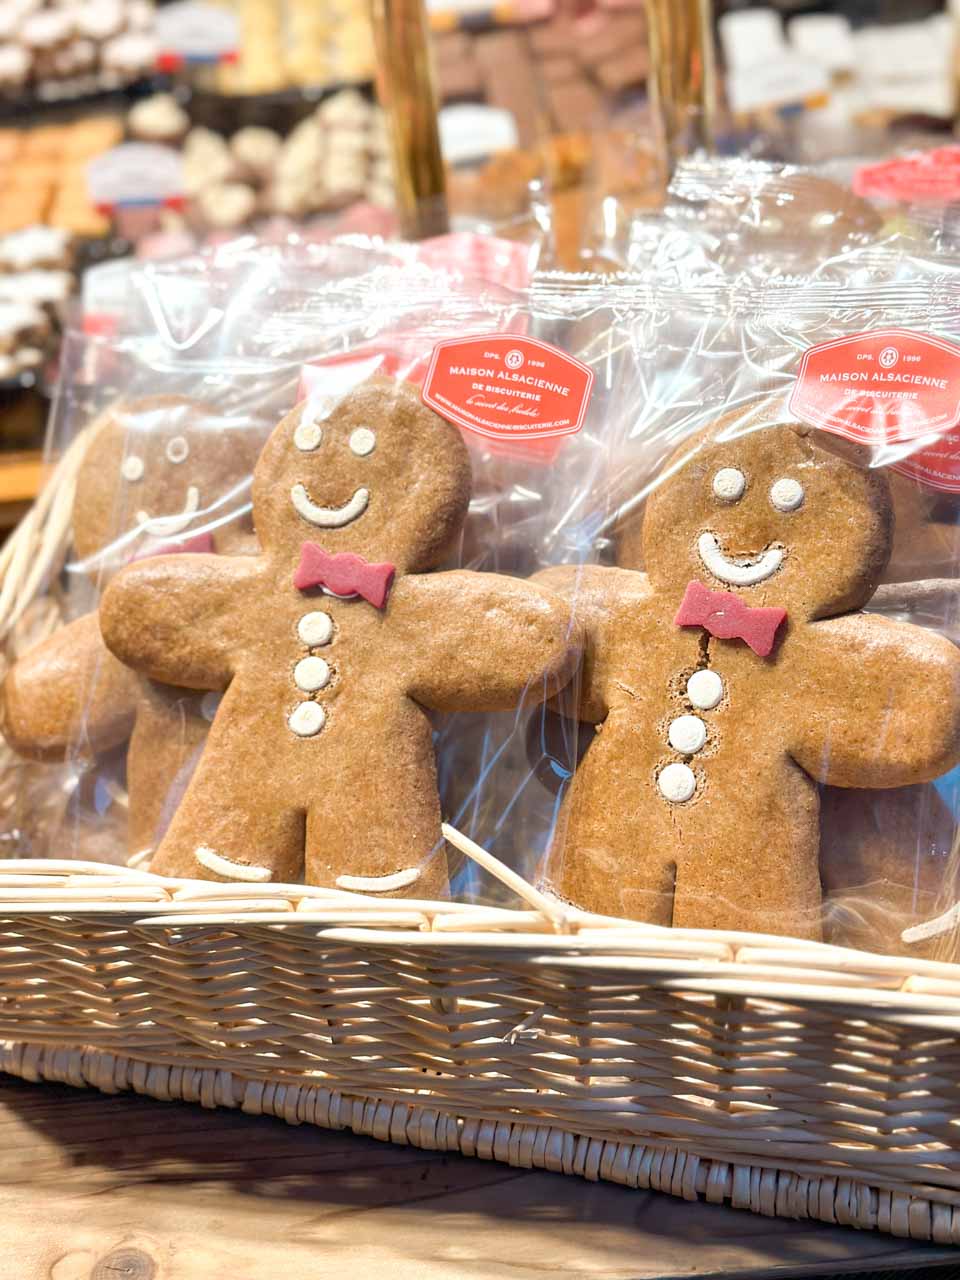 A selection of smiling gingerbread men, wrapped and ready for sale at the Colmar Christmas Market